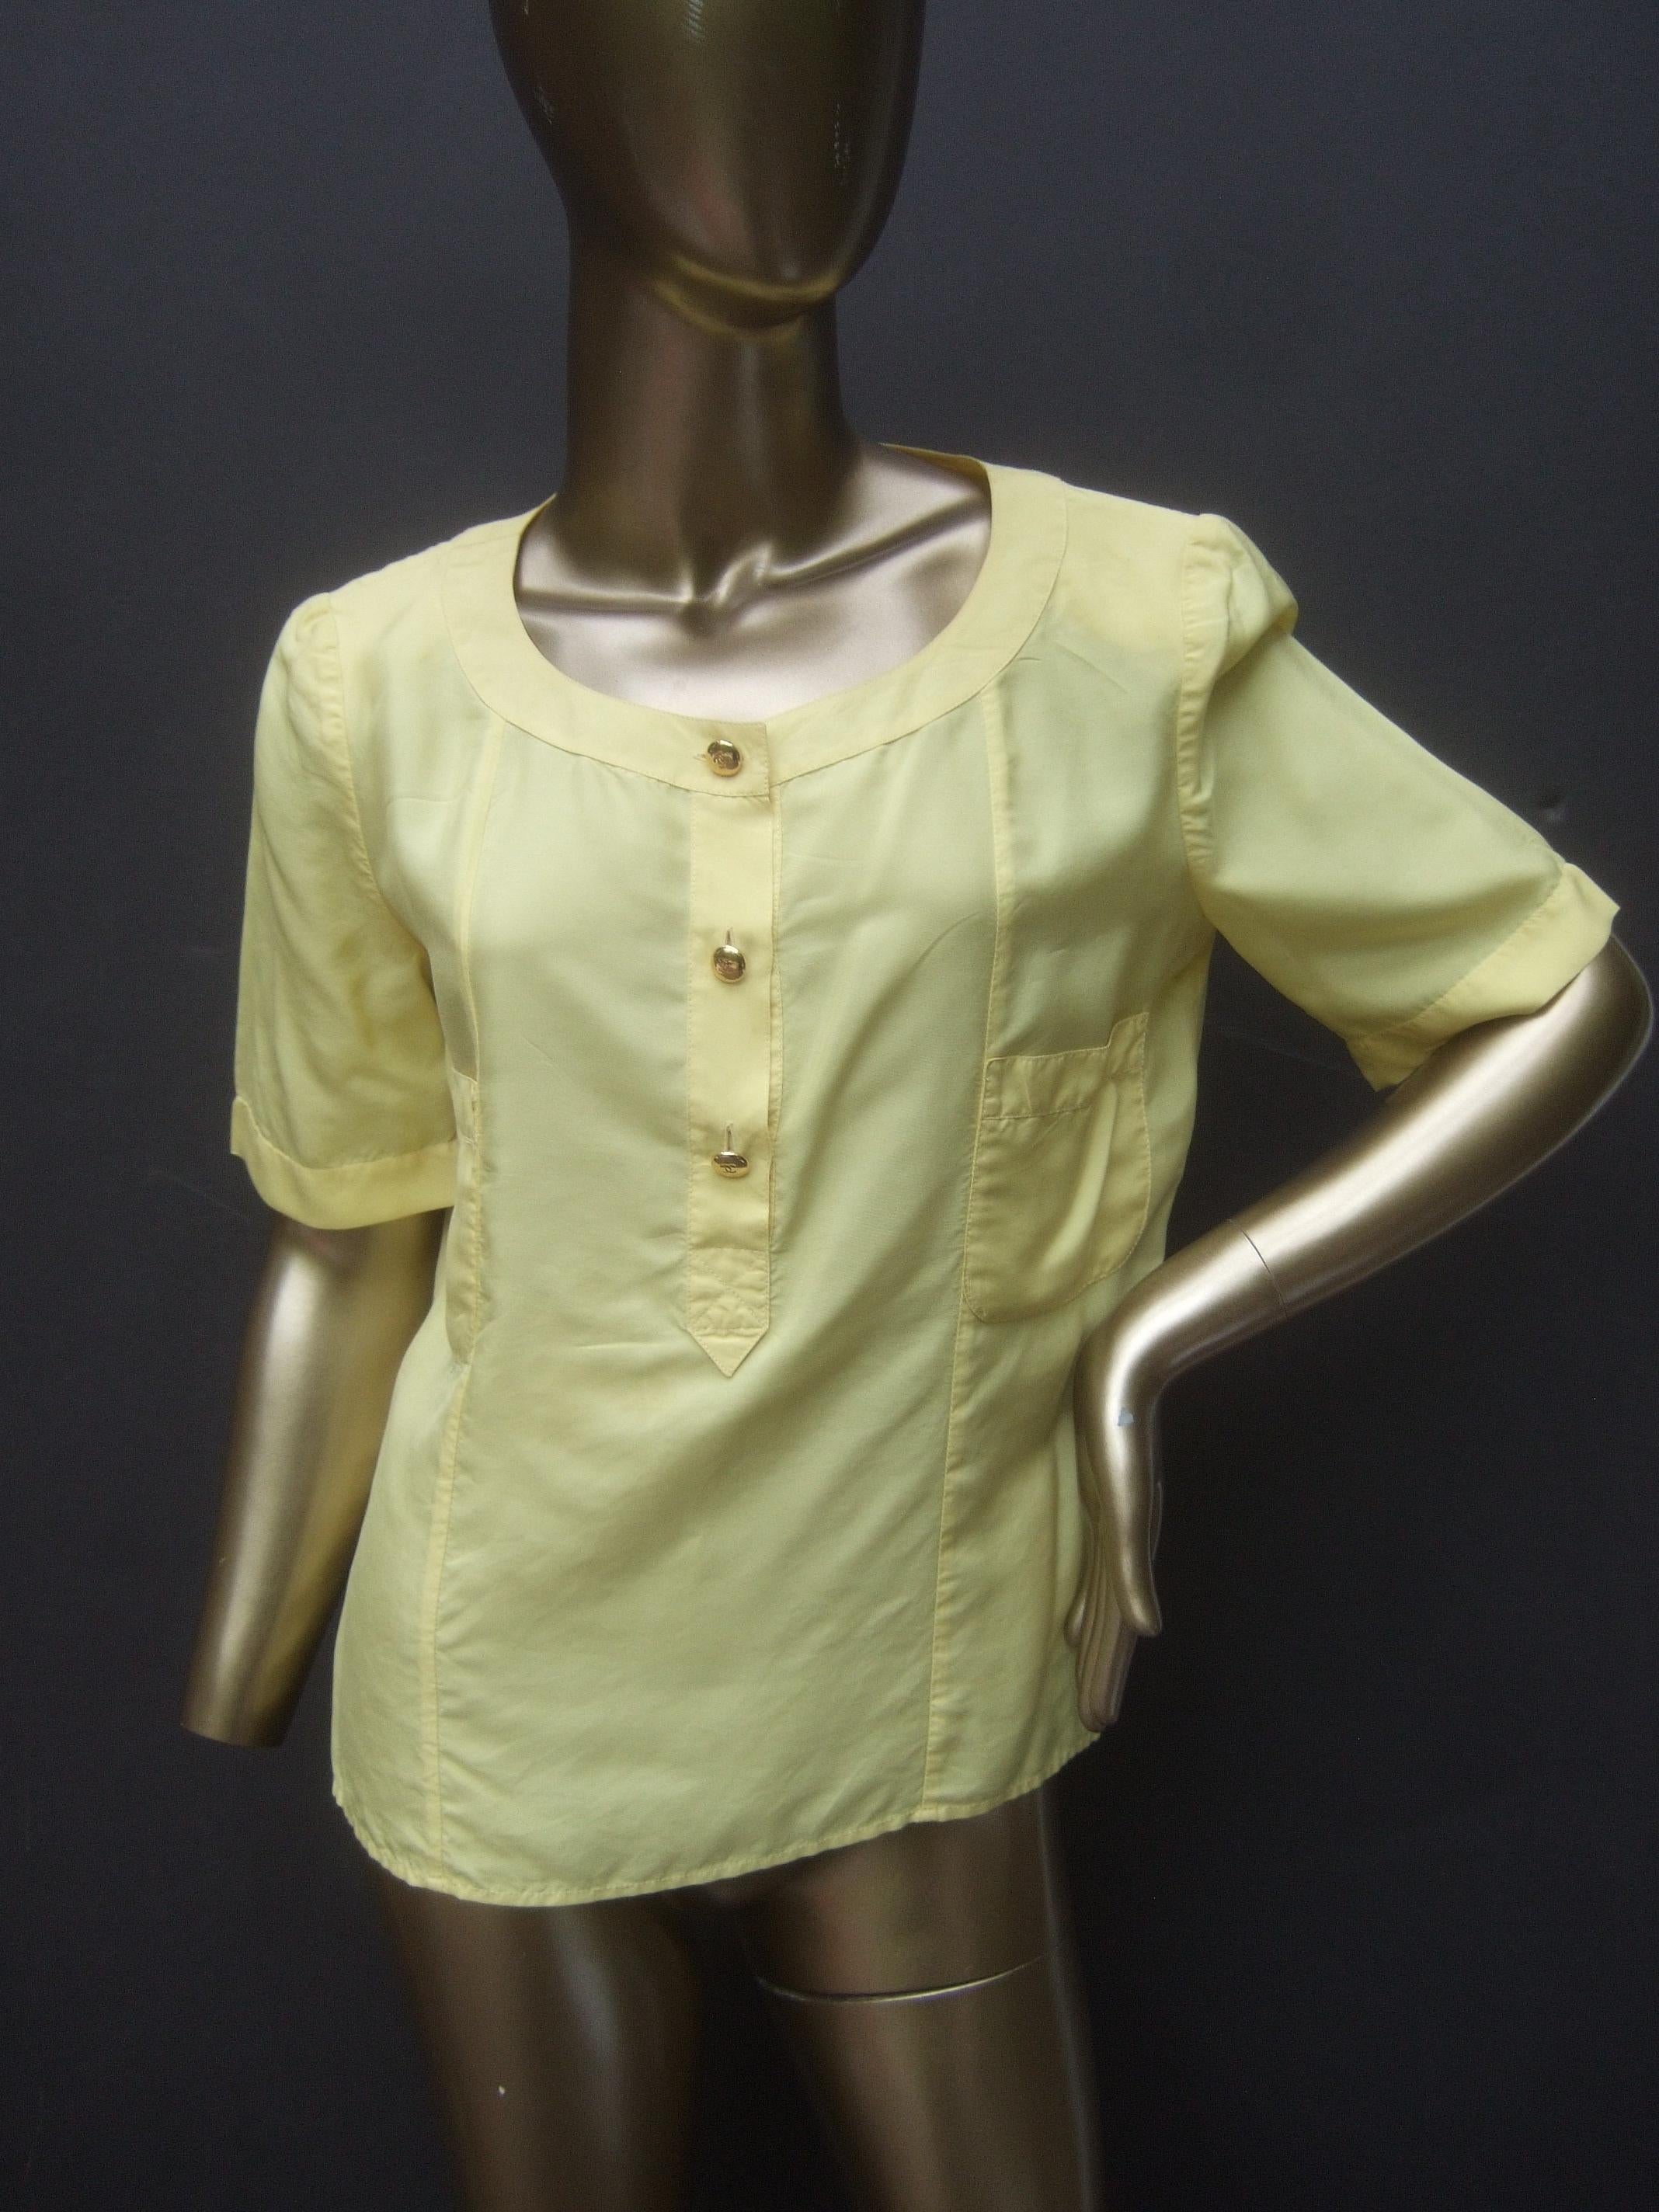 Chanel Boutique Yellow silk blouse with Chanel gilt metal buttons French Size 38

The luxurious breezy light-weight sheer short sleeve silk blouse is adorned with three Chanel gilt metal C.C. initial buttons that partially run down the